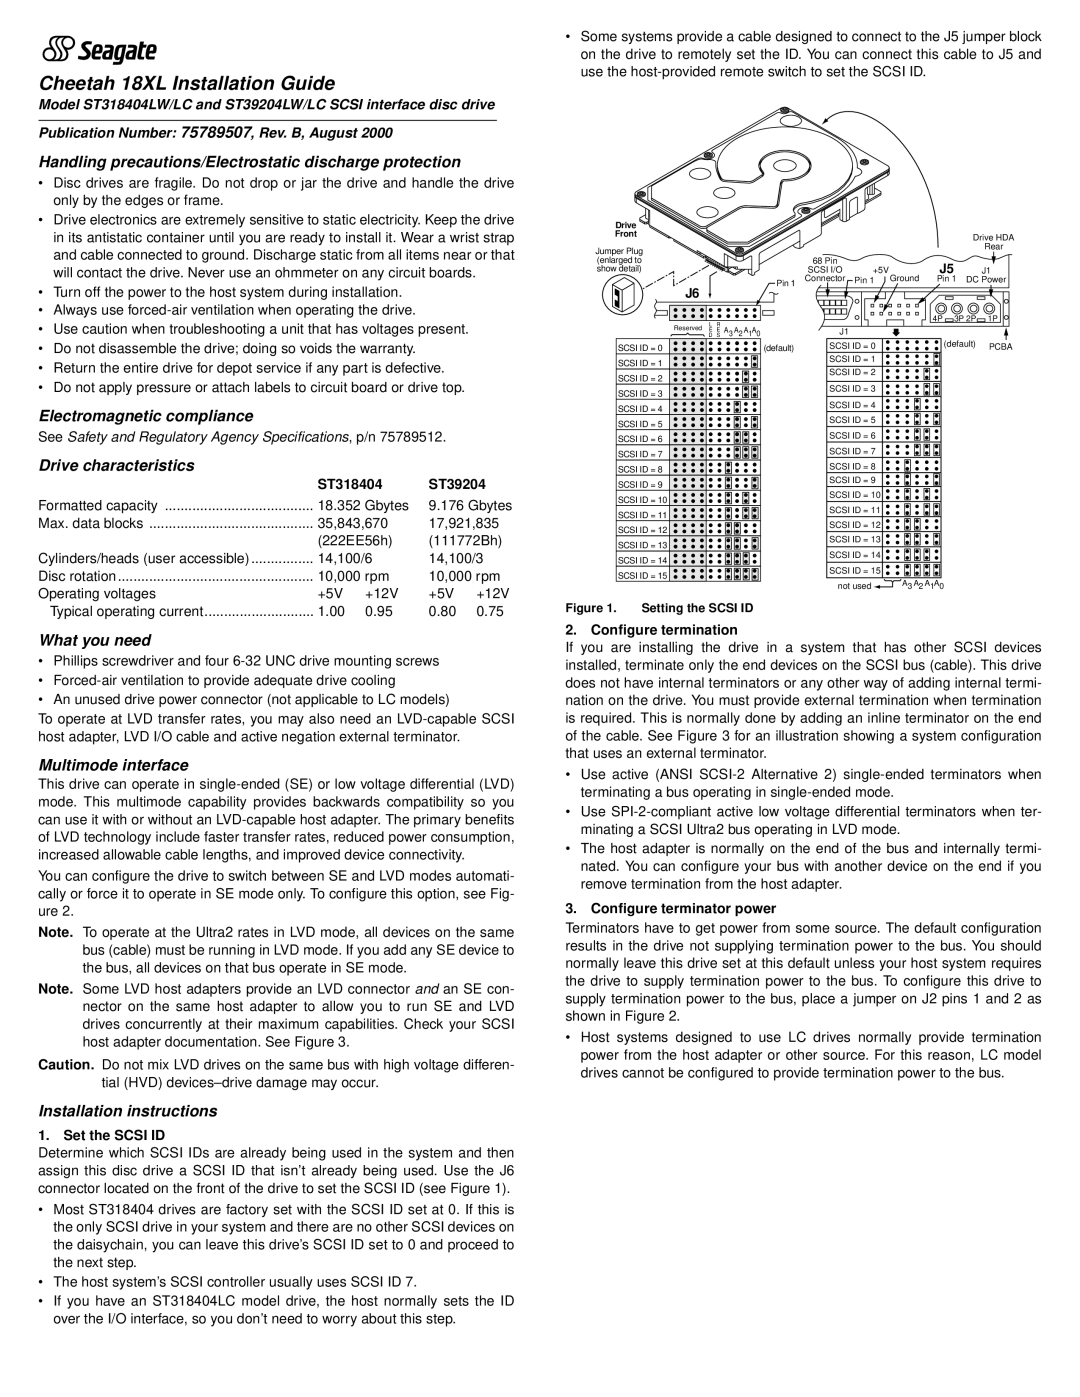 Seagate ST39204LW/LC installation instructions Handling precautions/Electrostatic discharge protection, What you need 